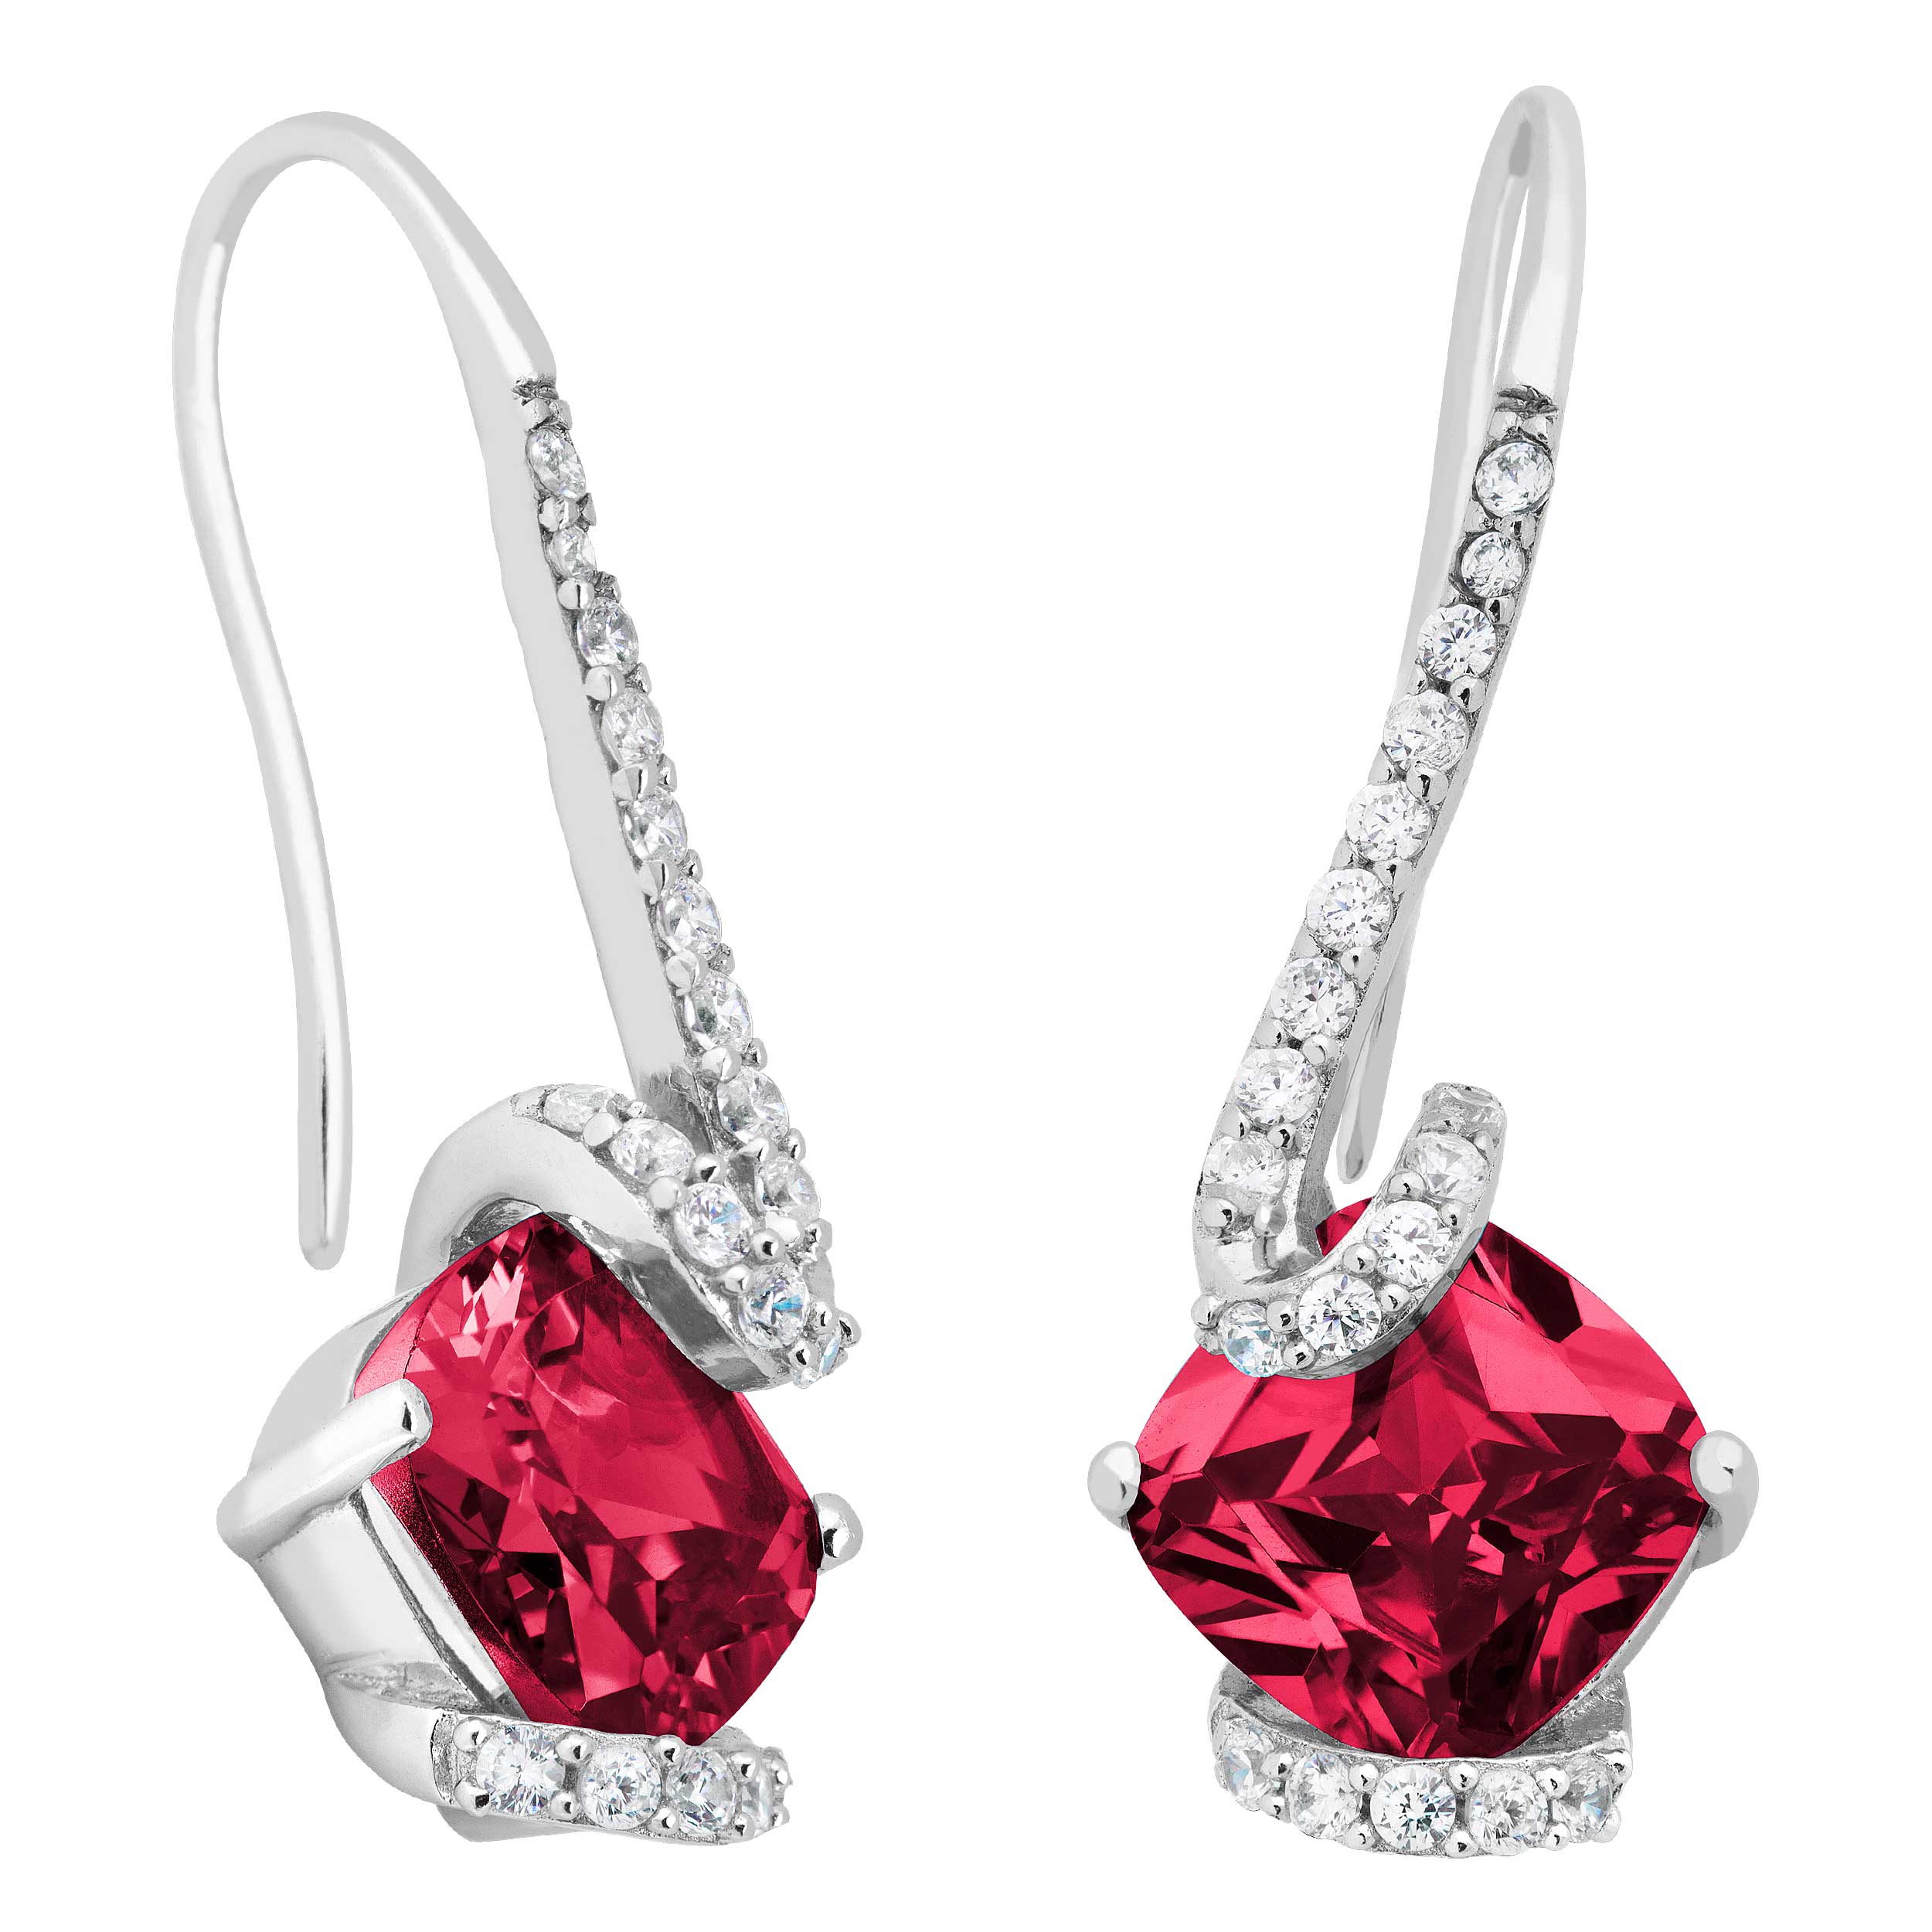 Cushion-Cut Created Ruby and White Topaz Earrings, Rhodium Plated Sterling Silver